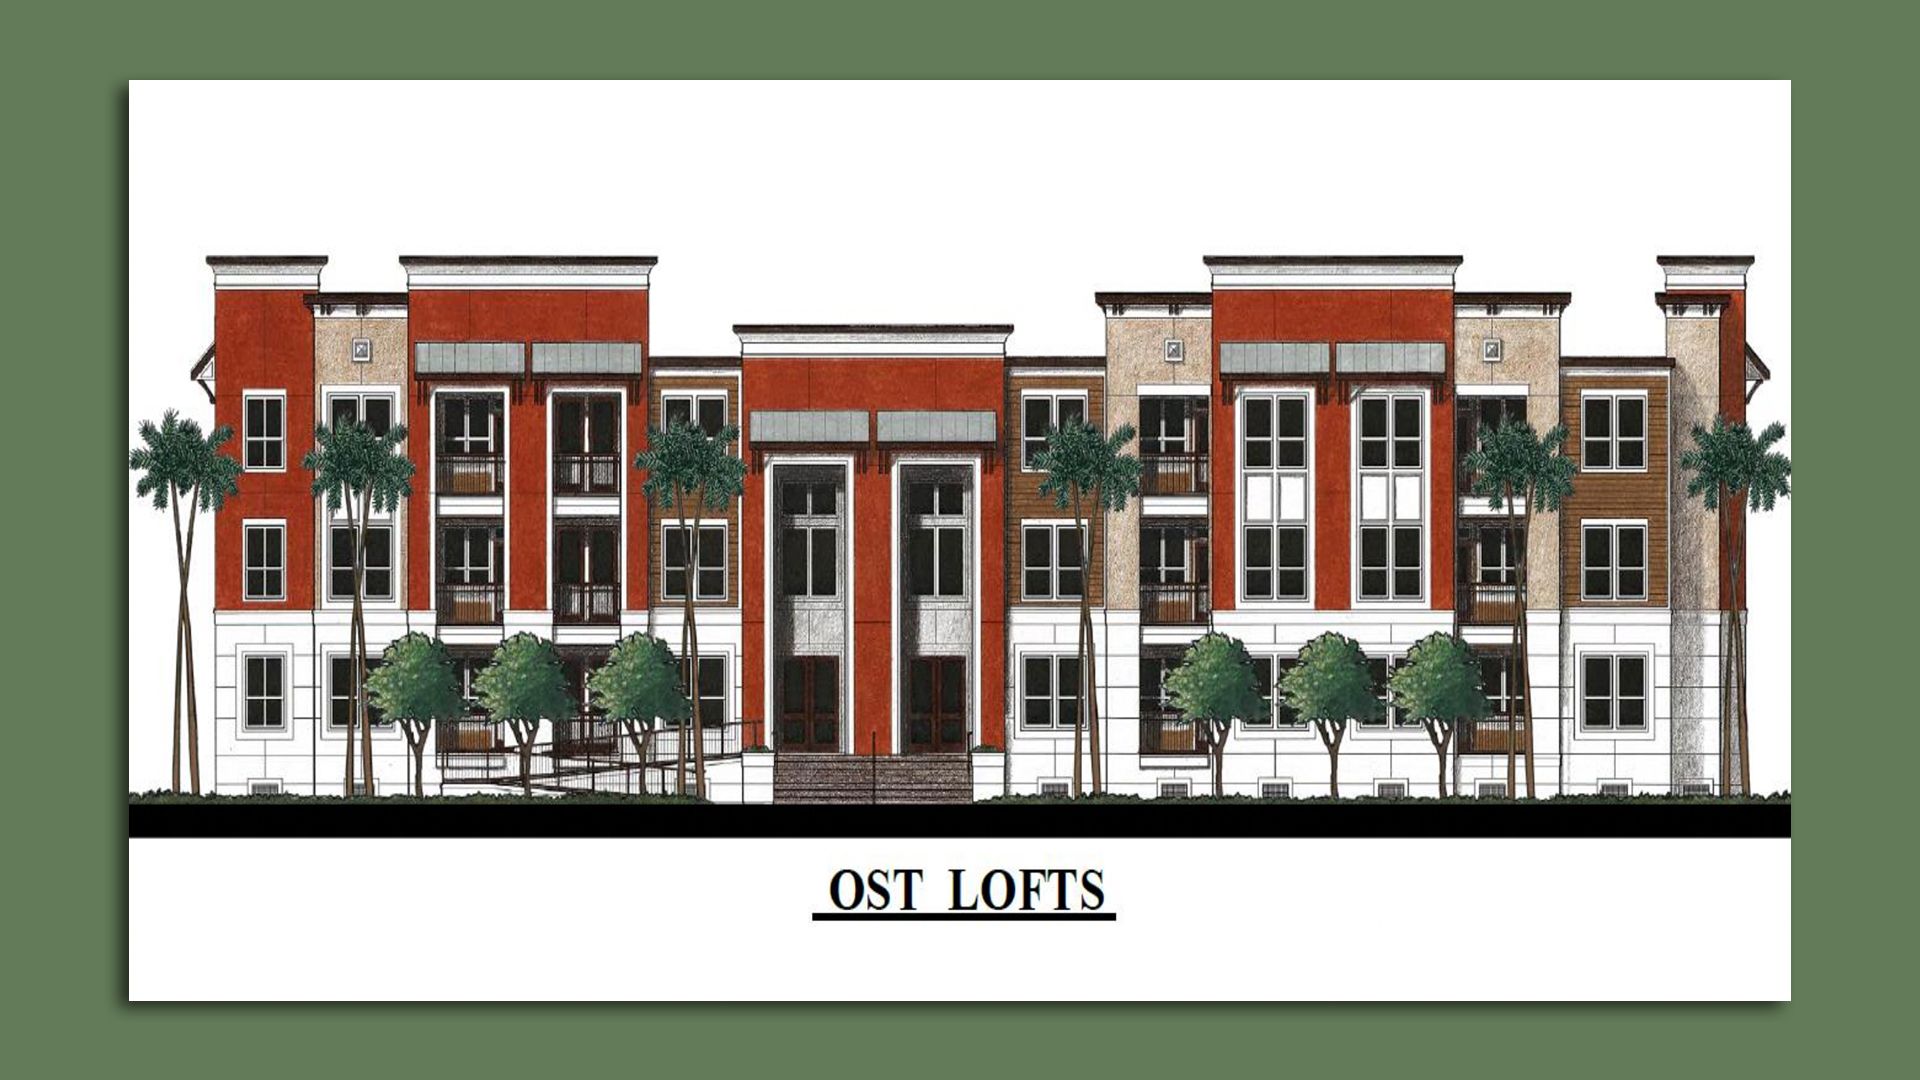 Rendering of the side of a three-story apartment building, called the OST Lofts